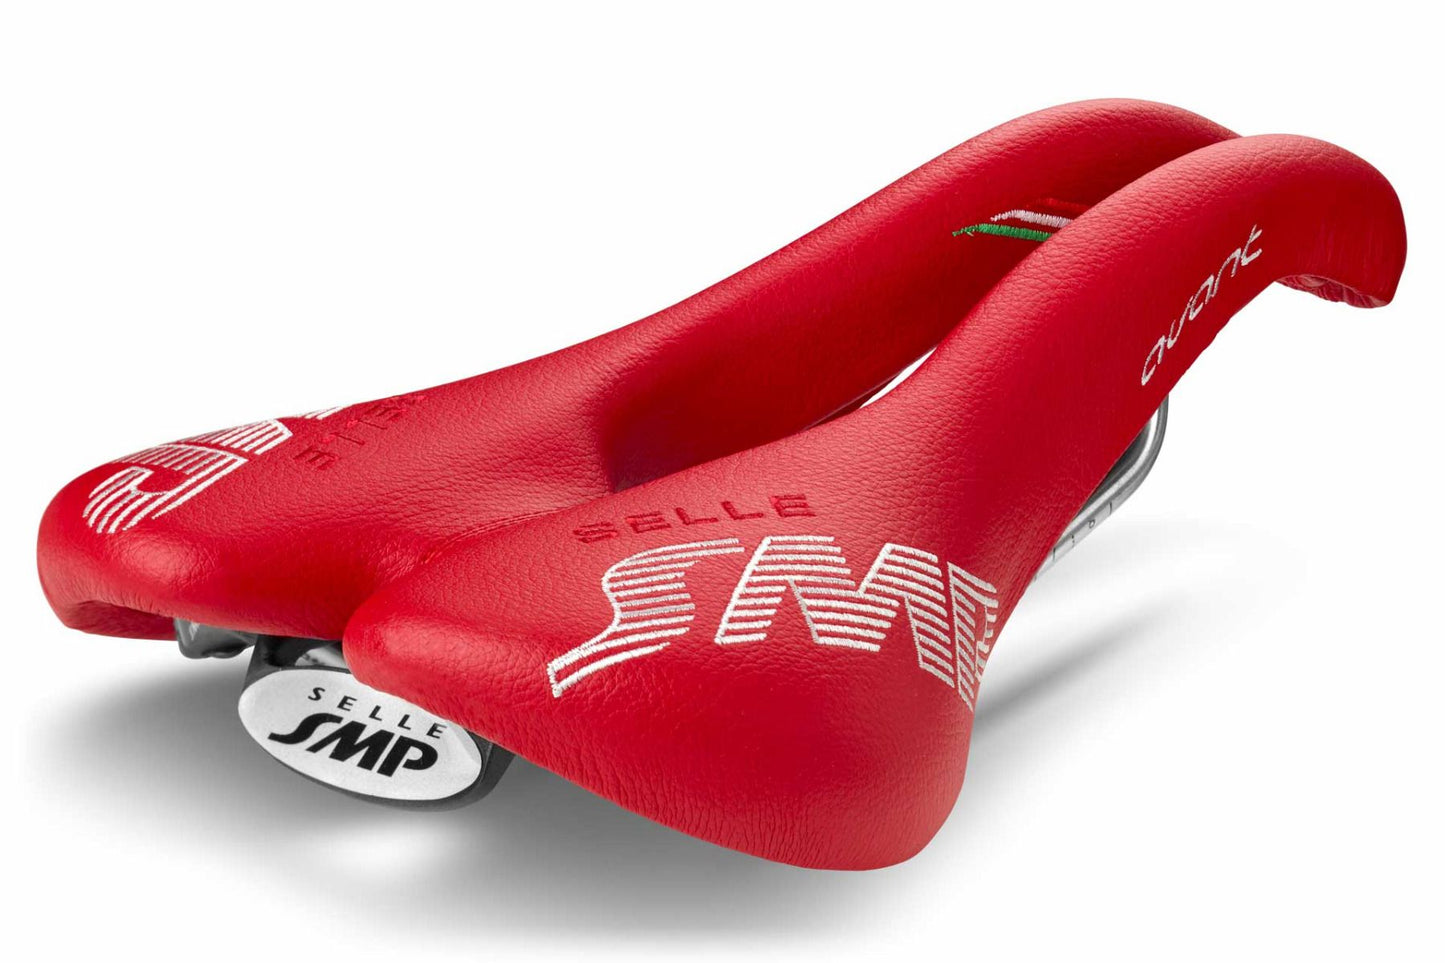 Selle SMP Avant Saddle with Stainless Steel Rails (Red)